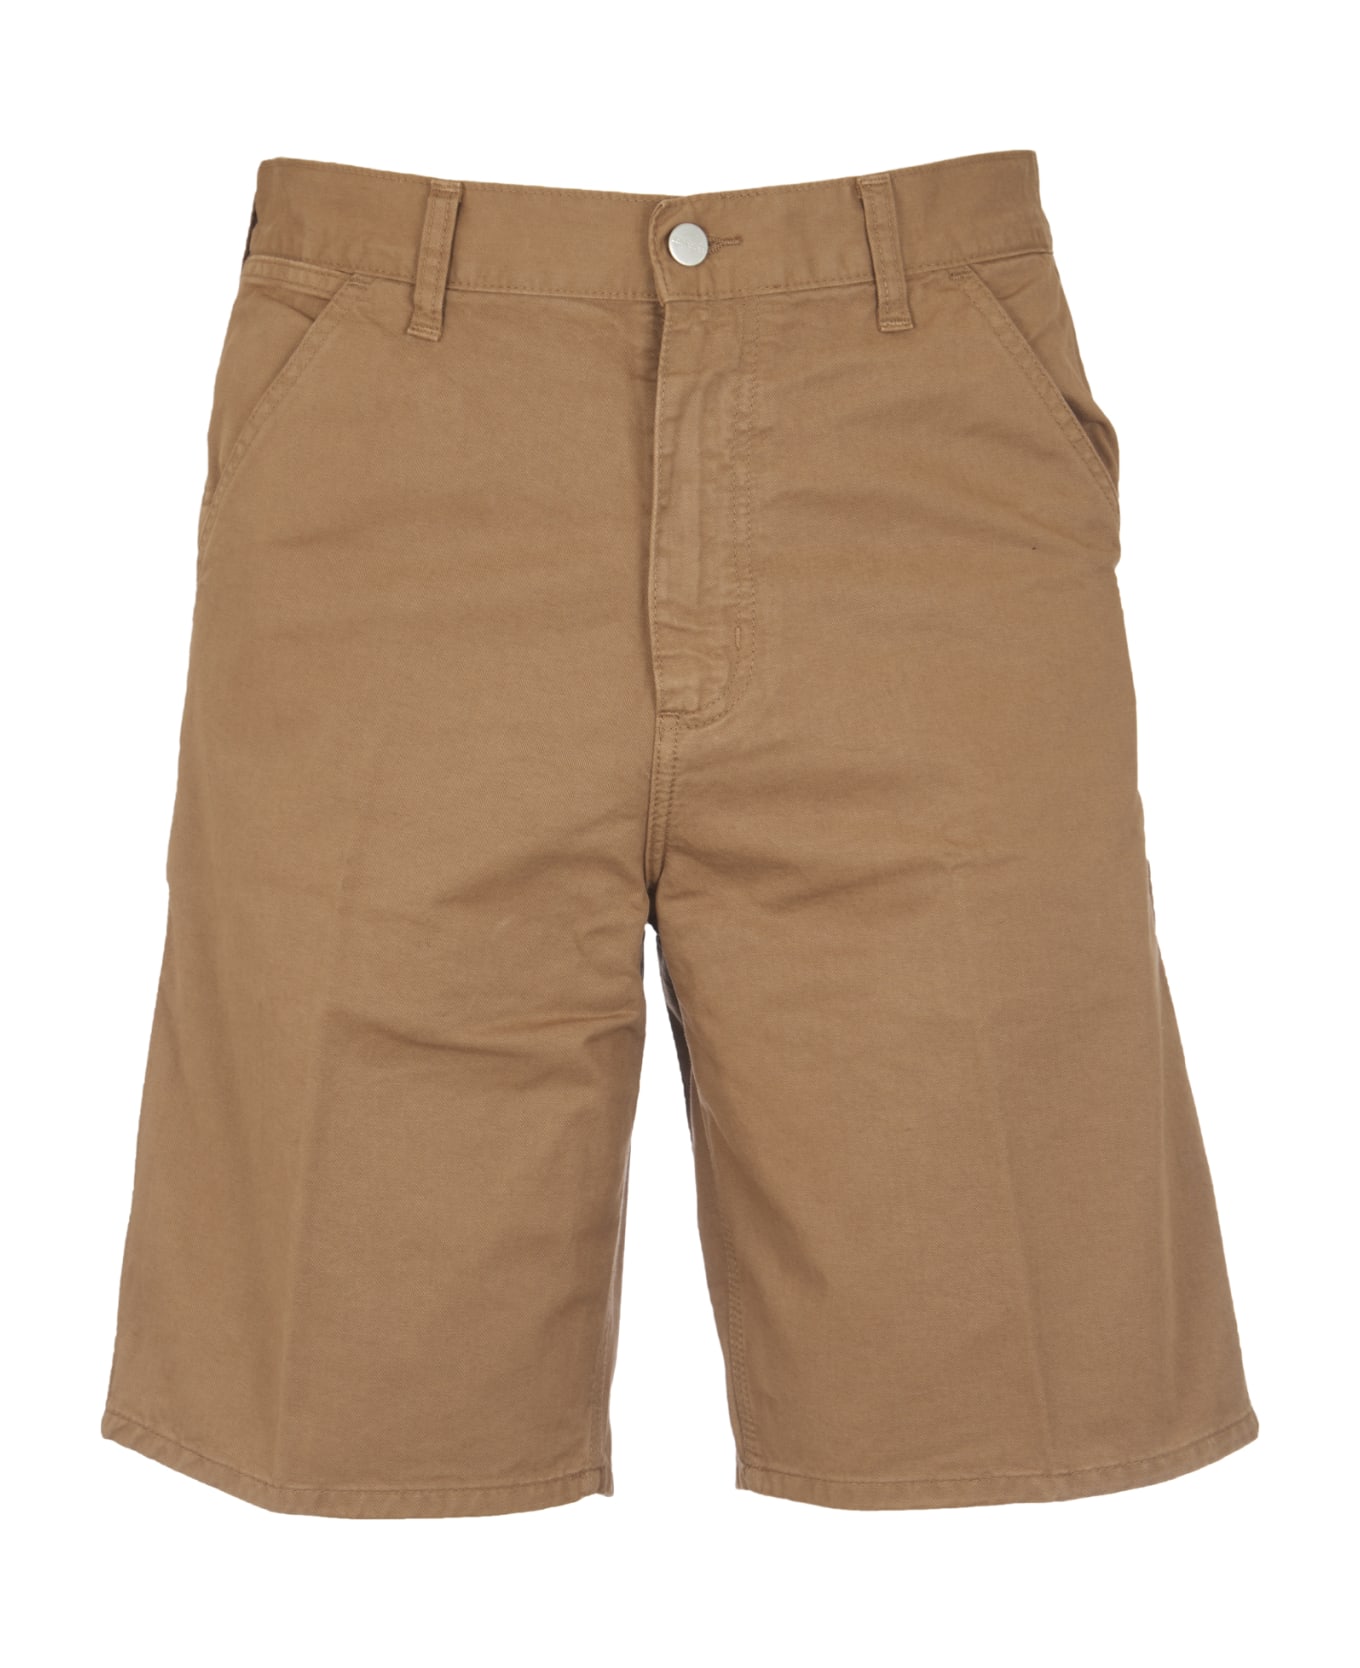 Carhartt Fitted Buttoned Shorts - Buffalo ショートパンツ